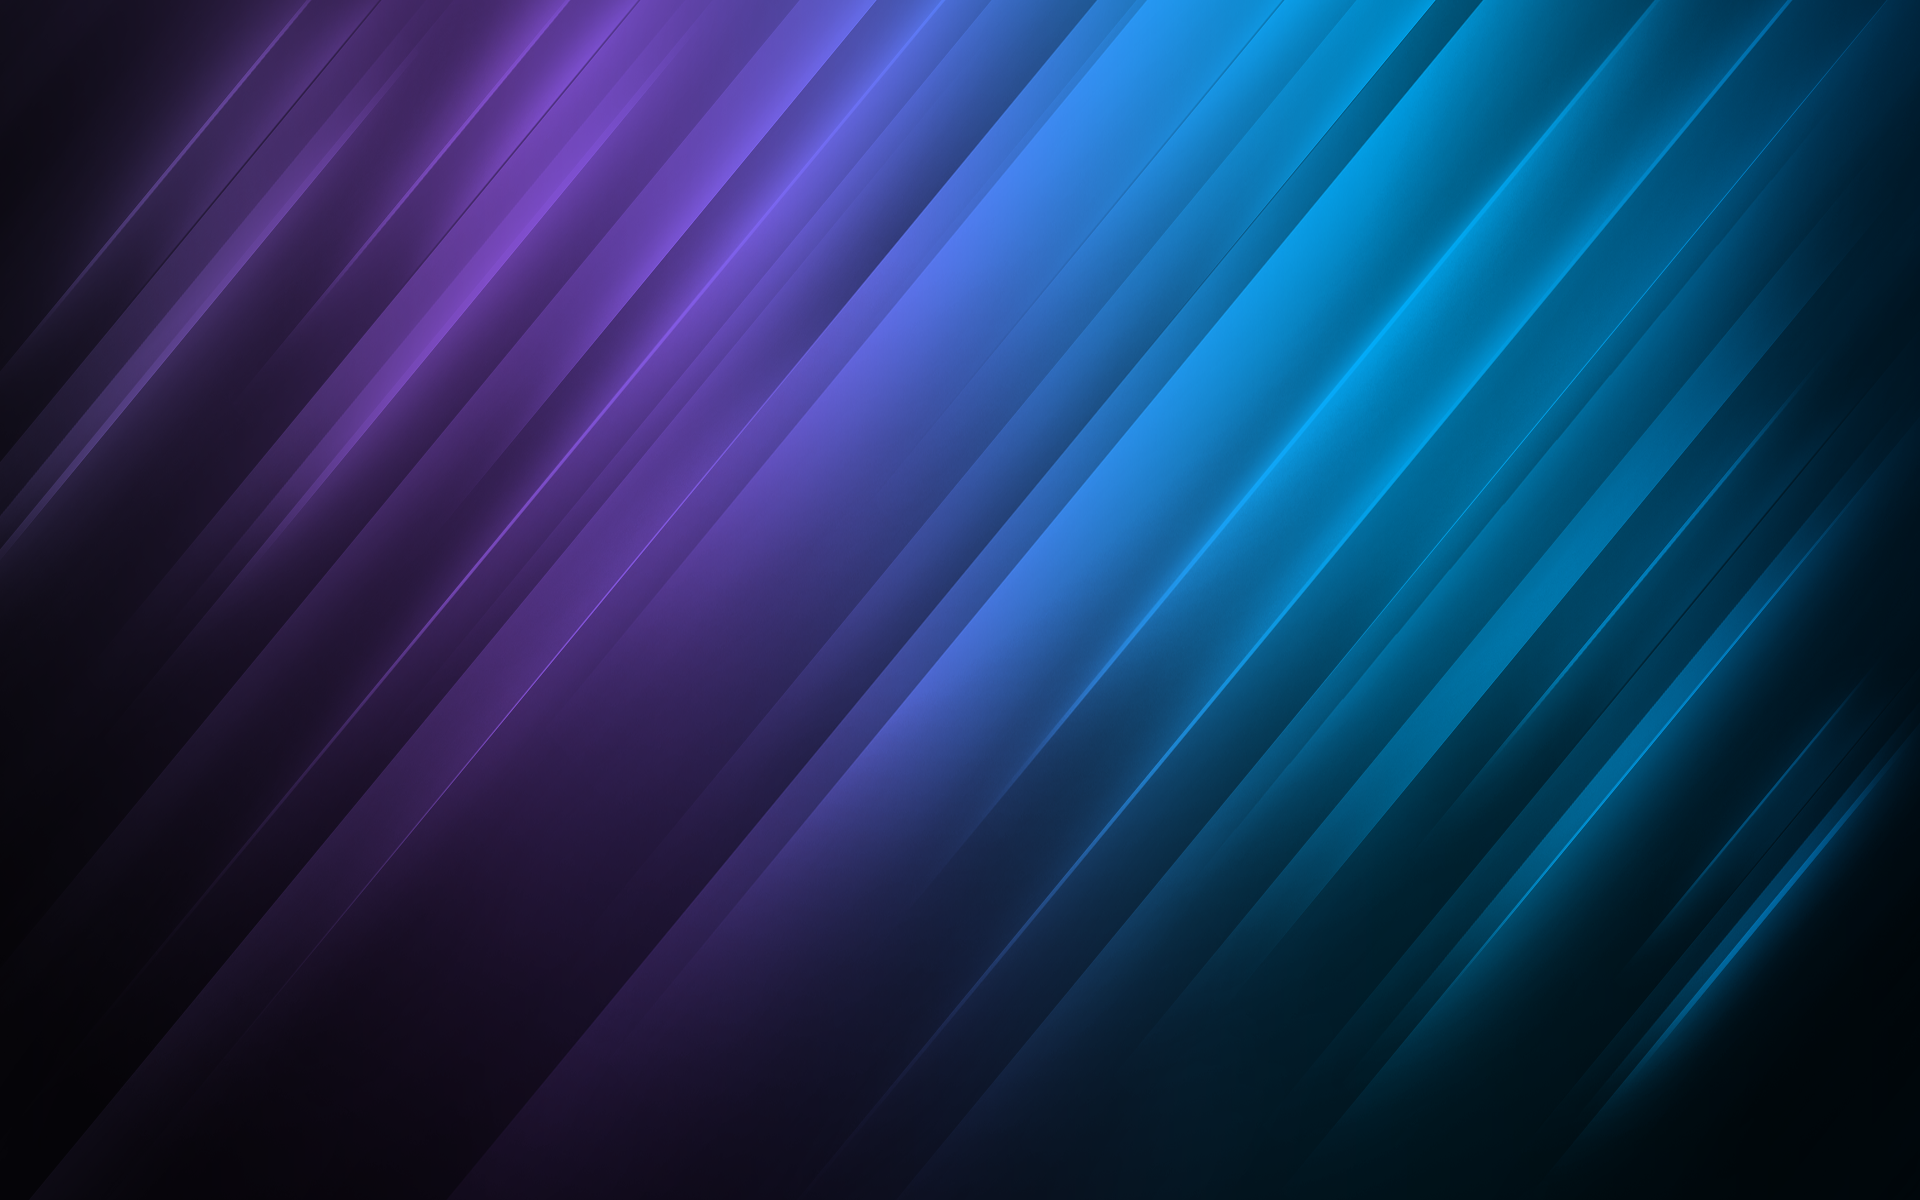 Abstract Turquoise HD Wallpaper | Background Image | 1920x1200
